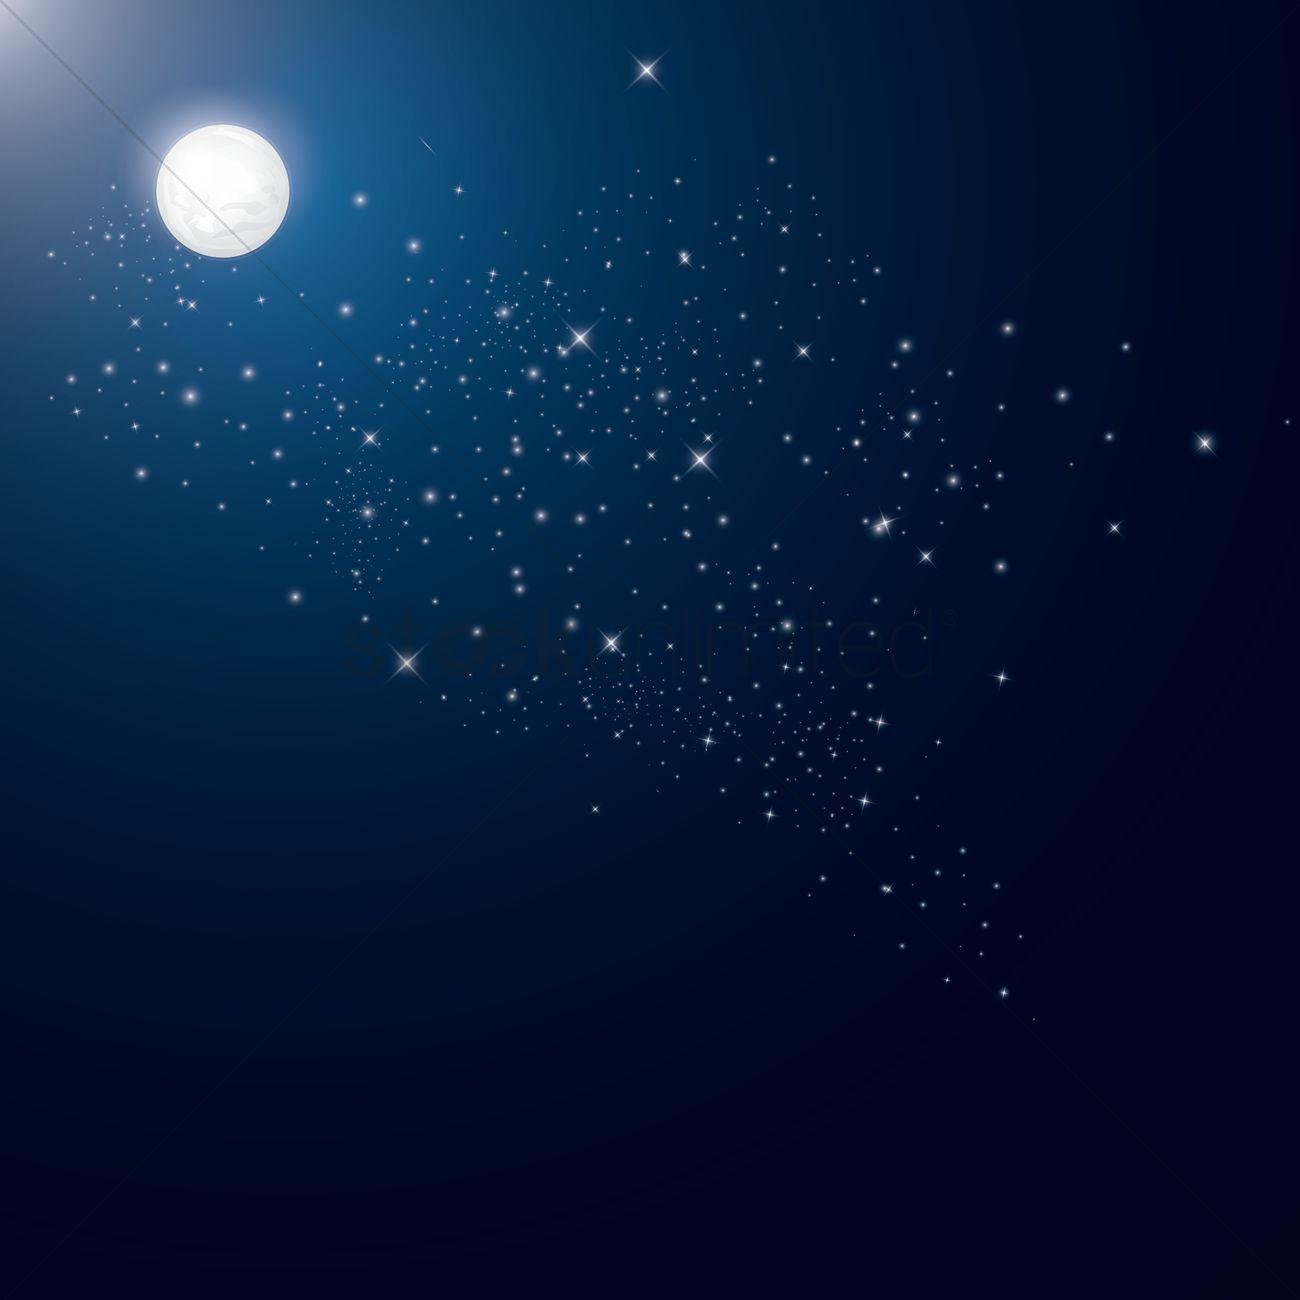 Full moon and stars background Vector Image